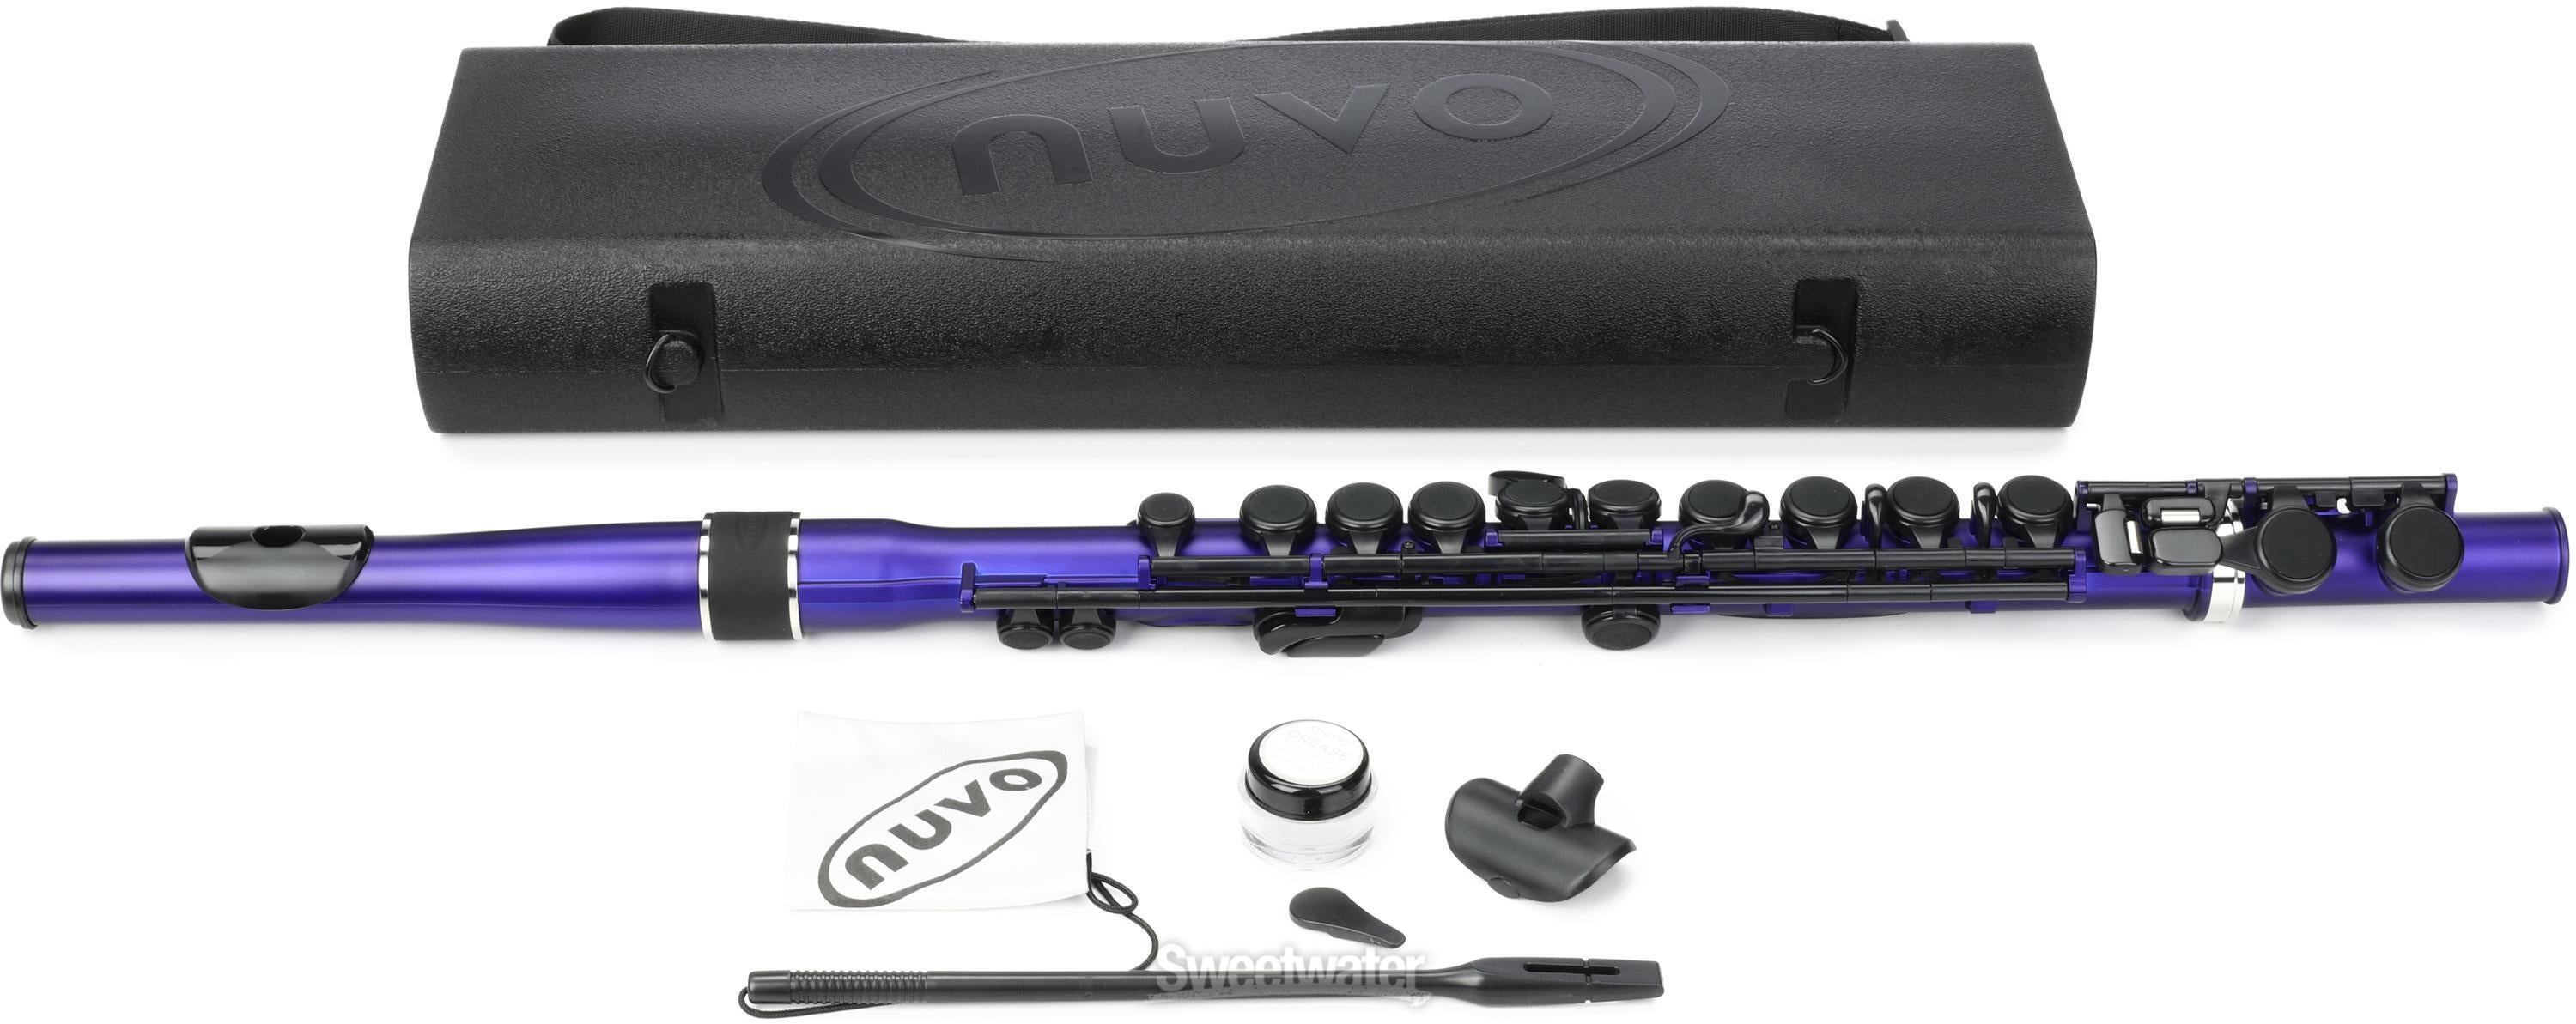 Nuvo Student Flute - Black/Blue | Sweetwater